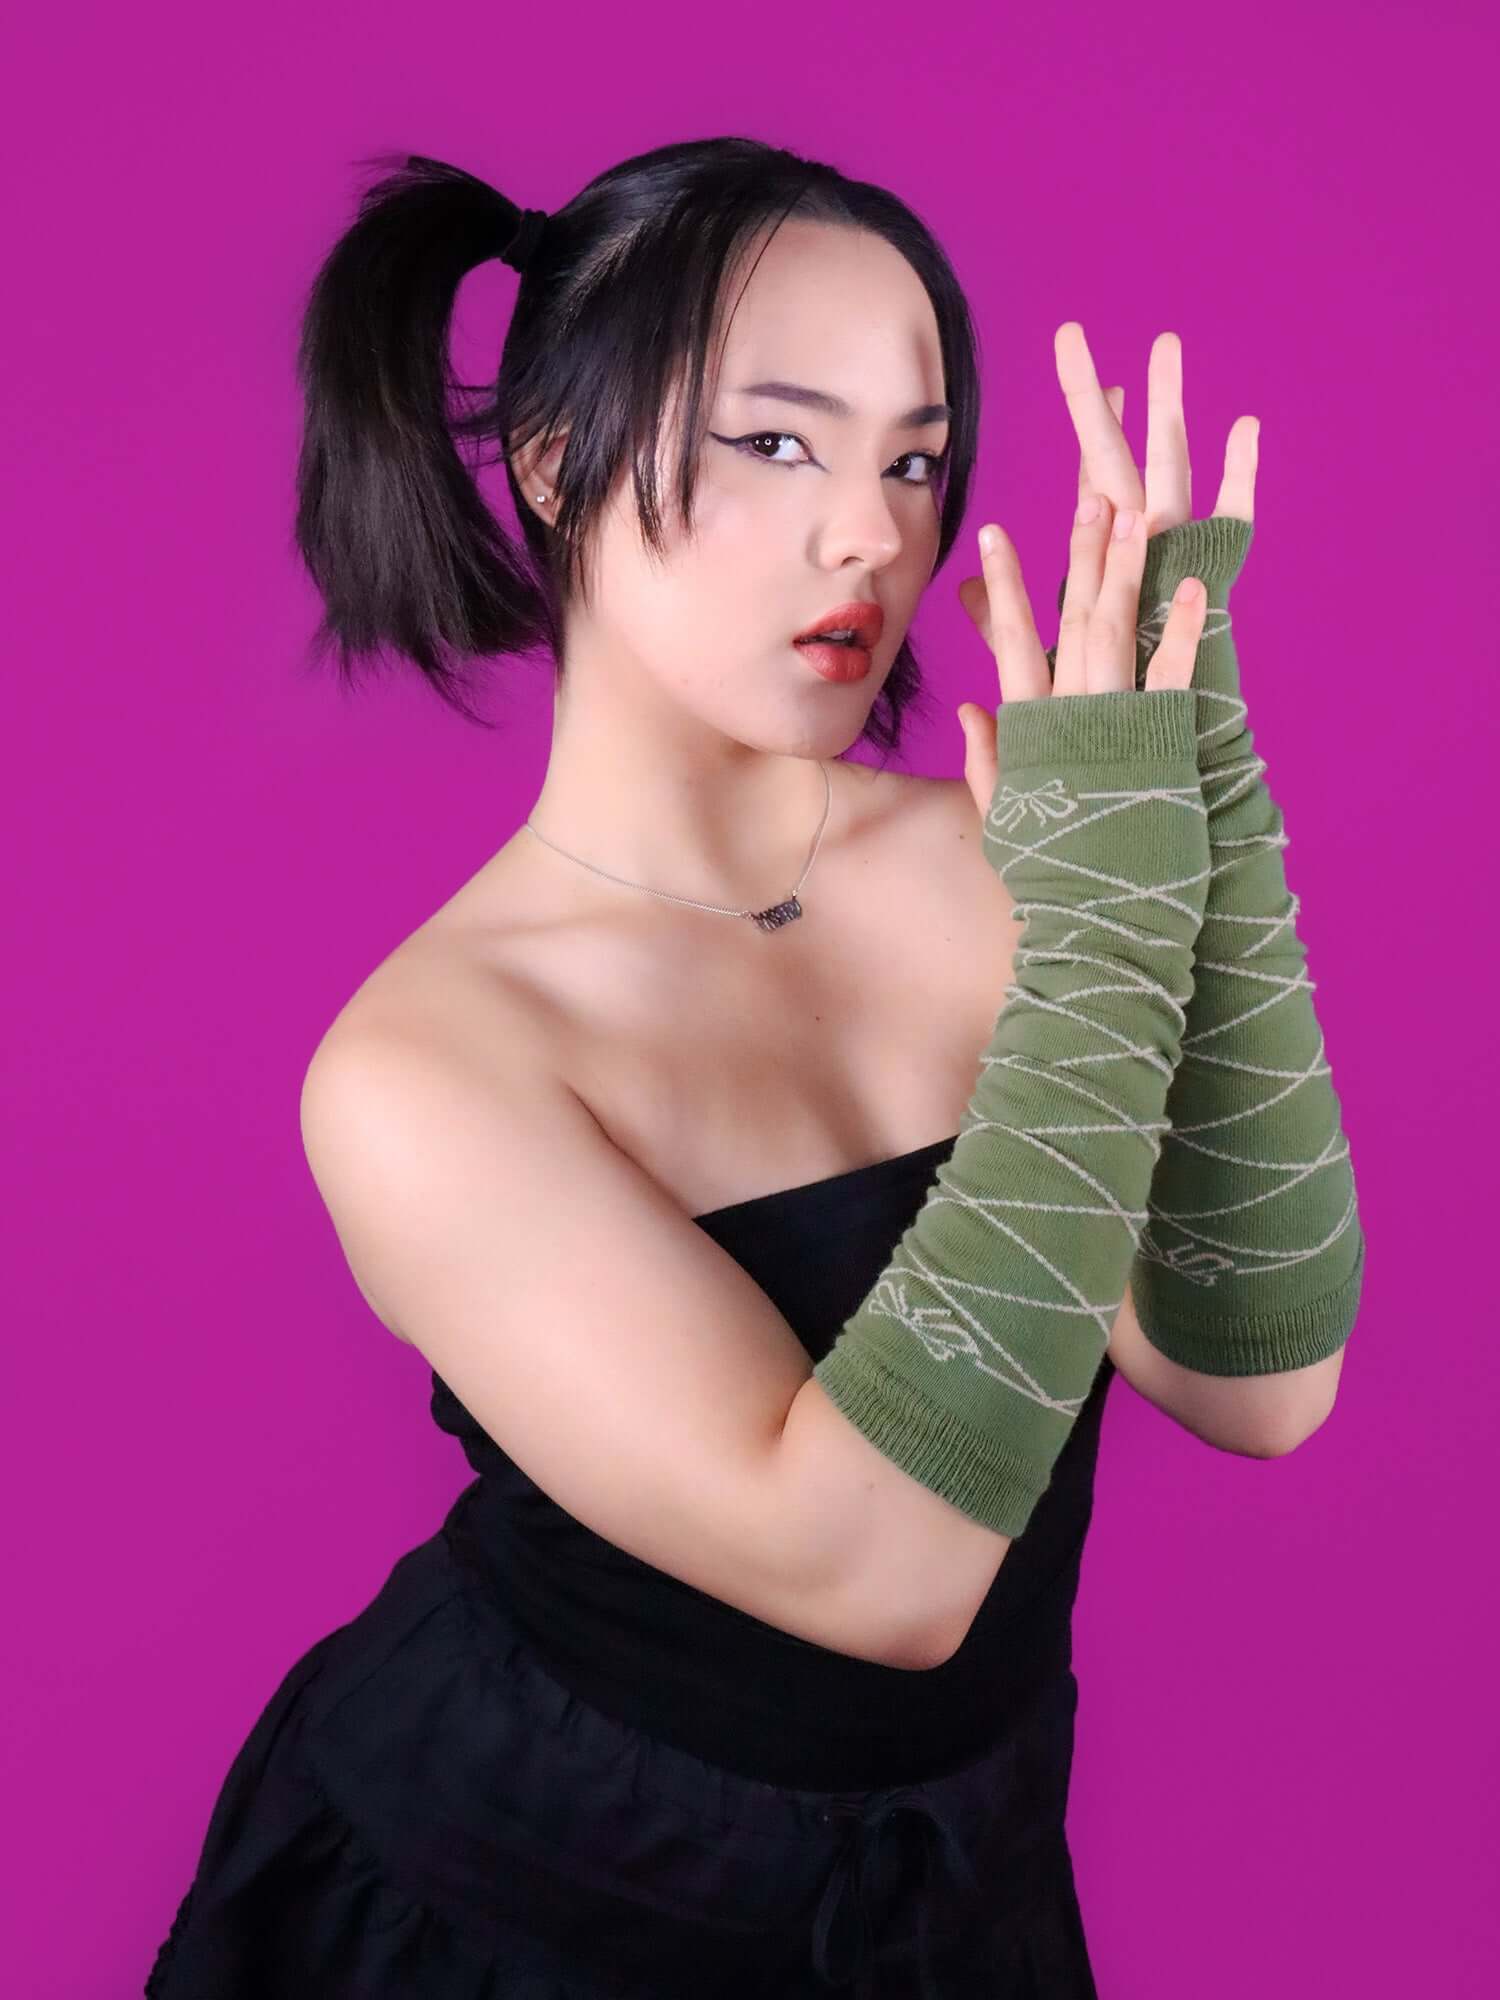 Model holding up arms showing the green and cream color of the arm warmers